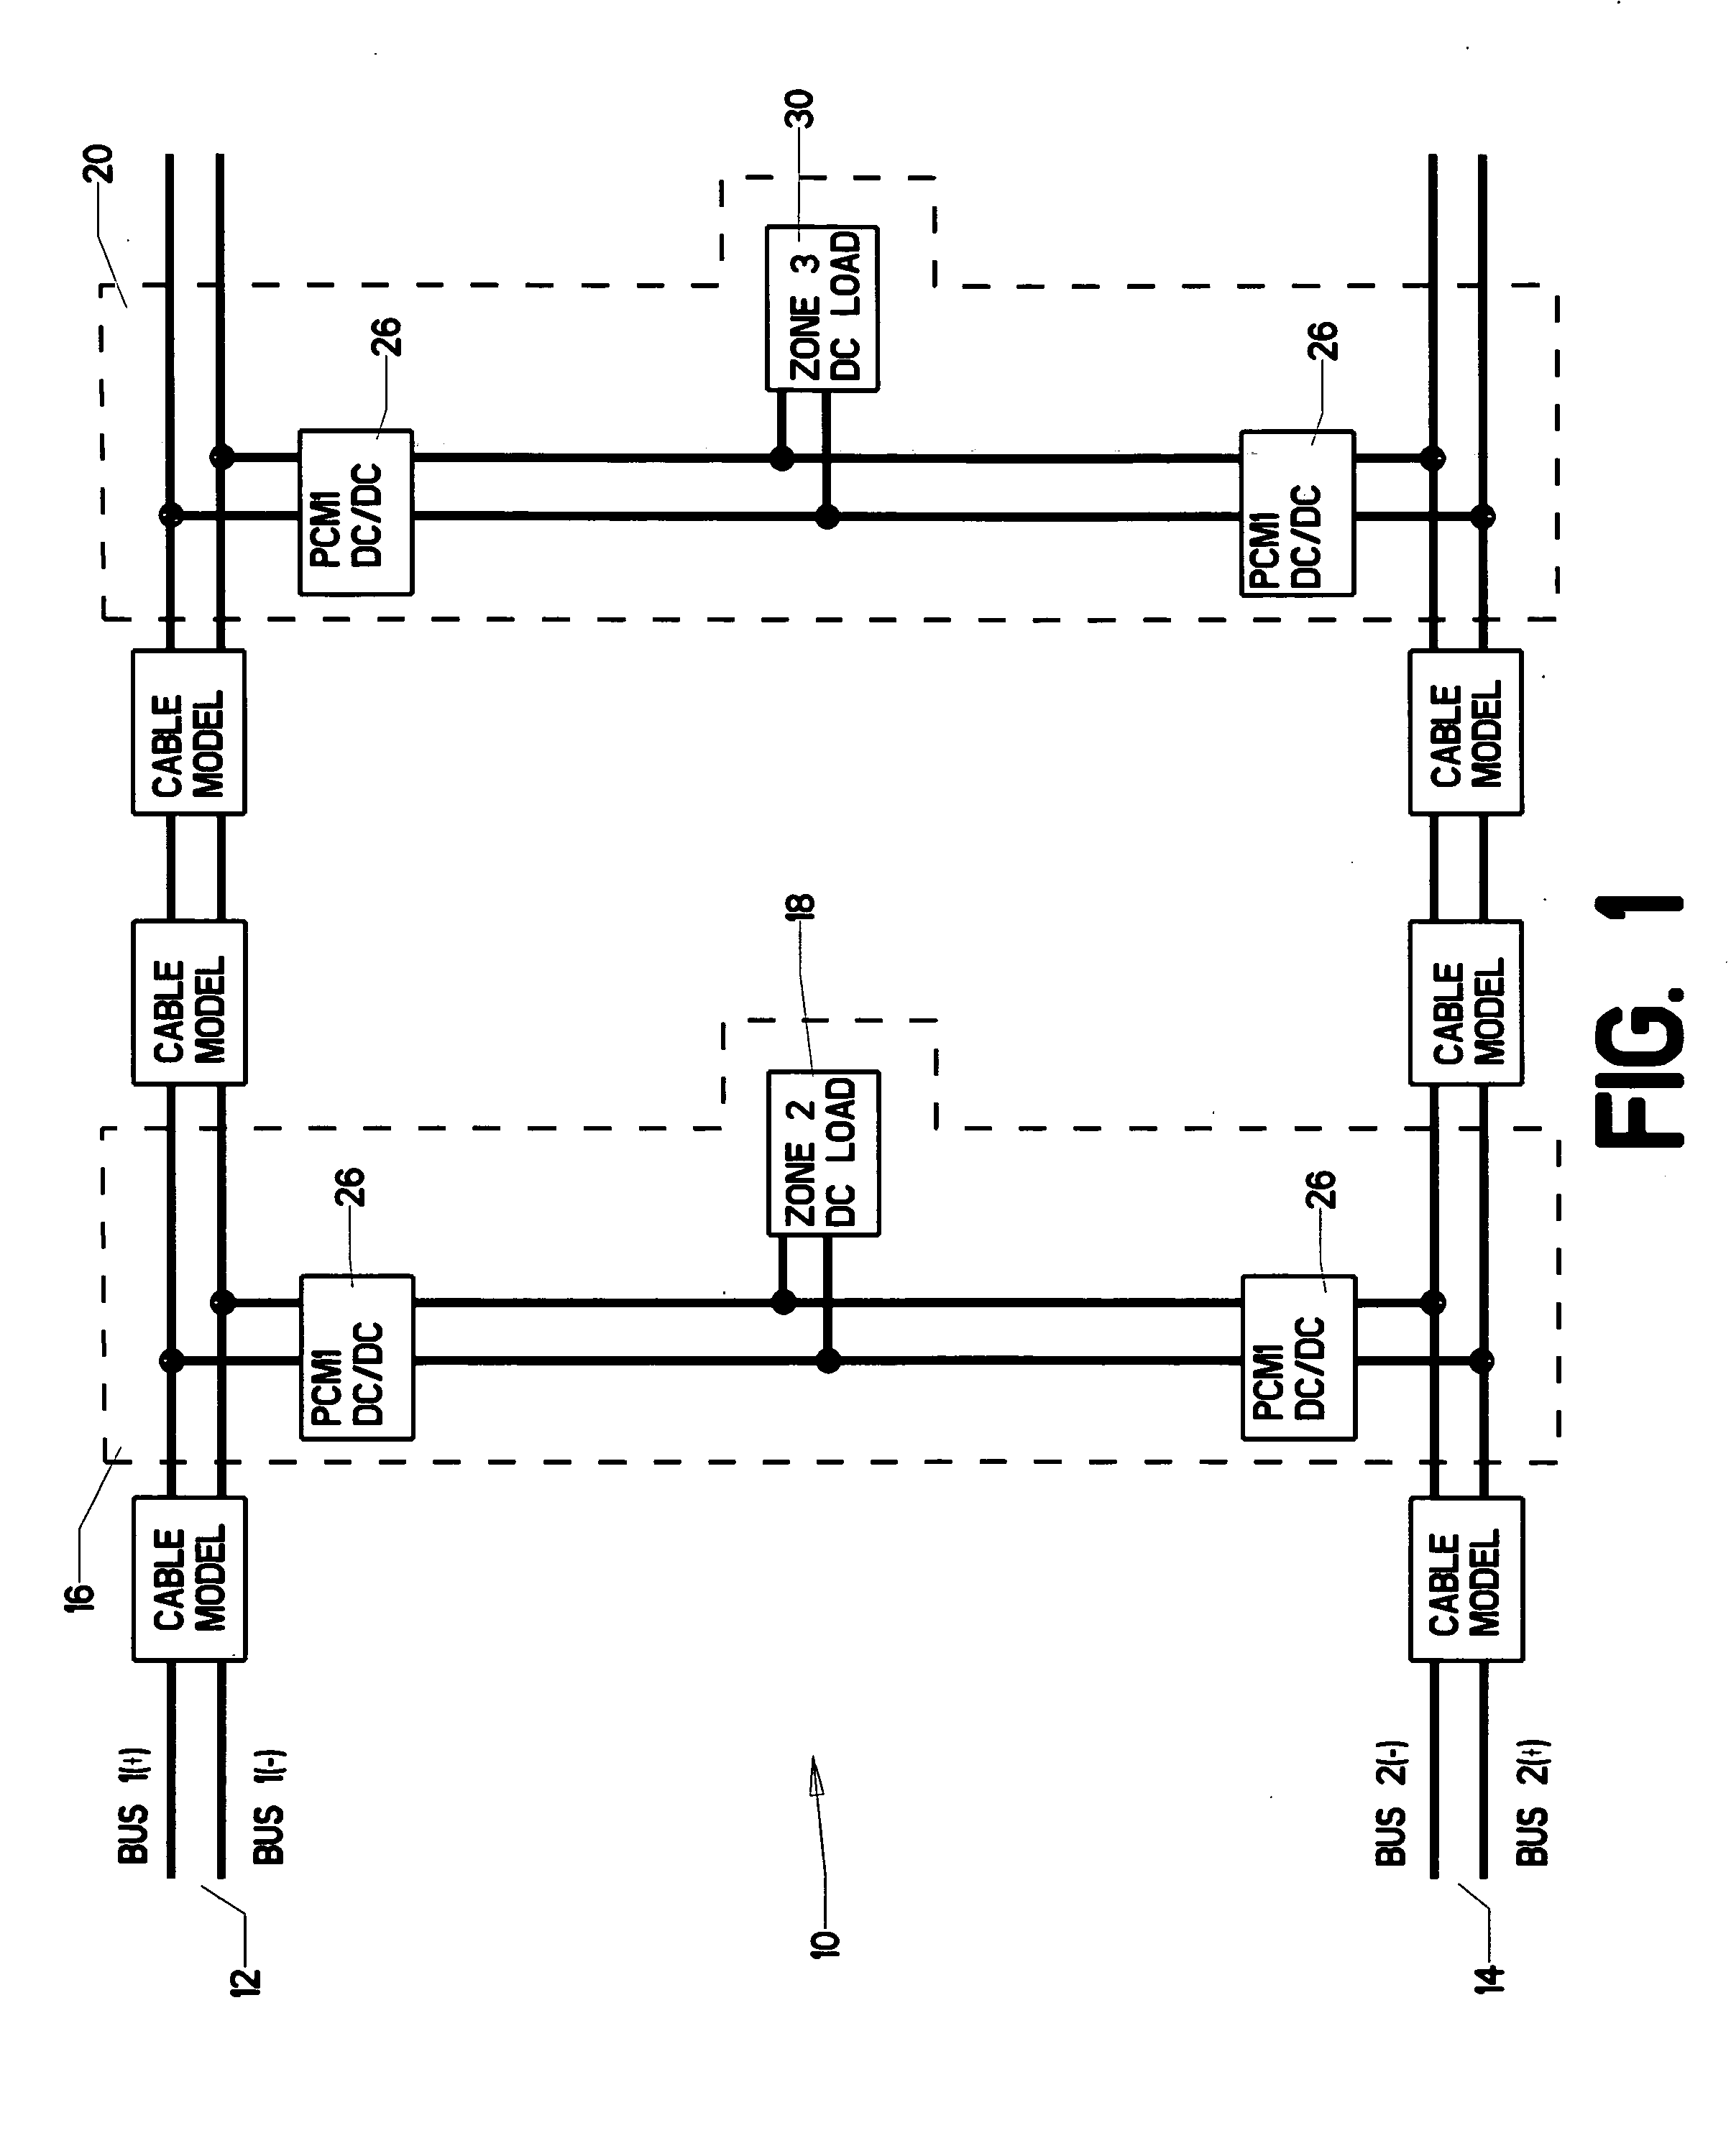 Method for locating phase to ground faults in DC distribution systems